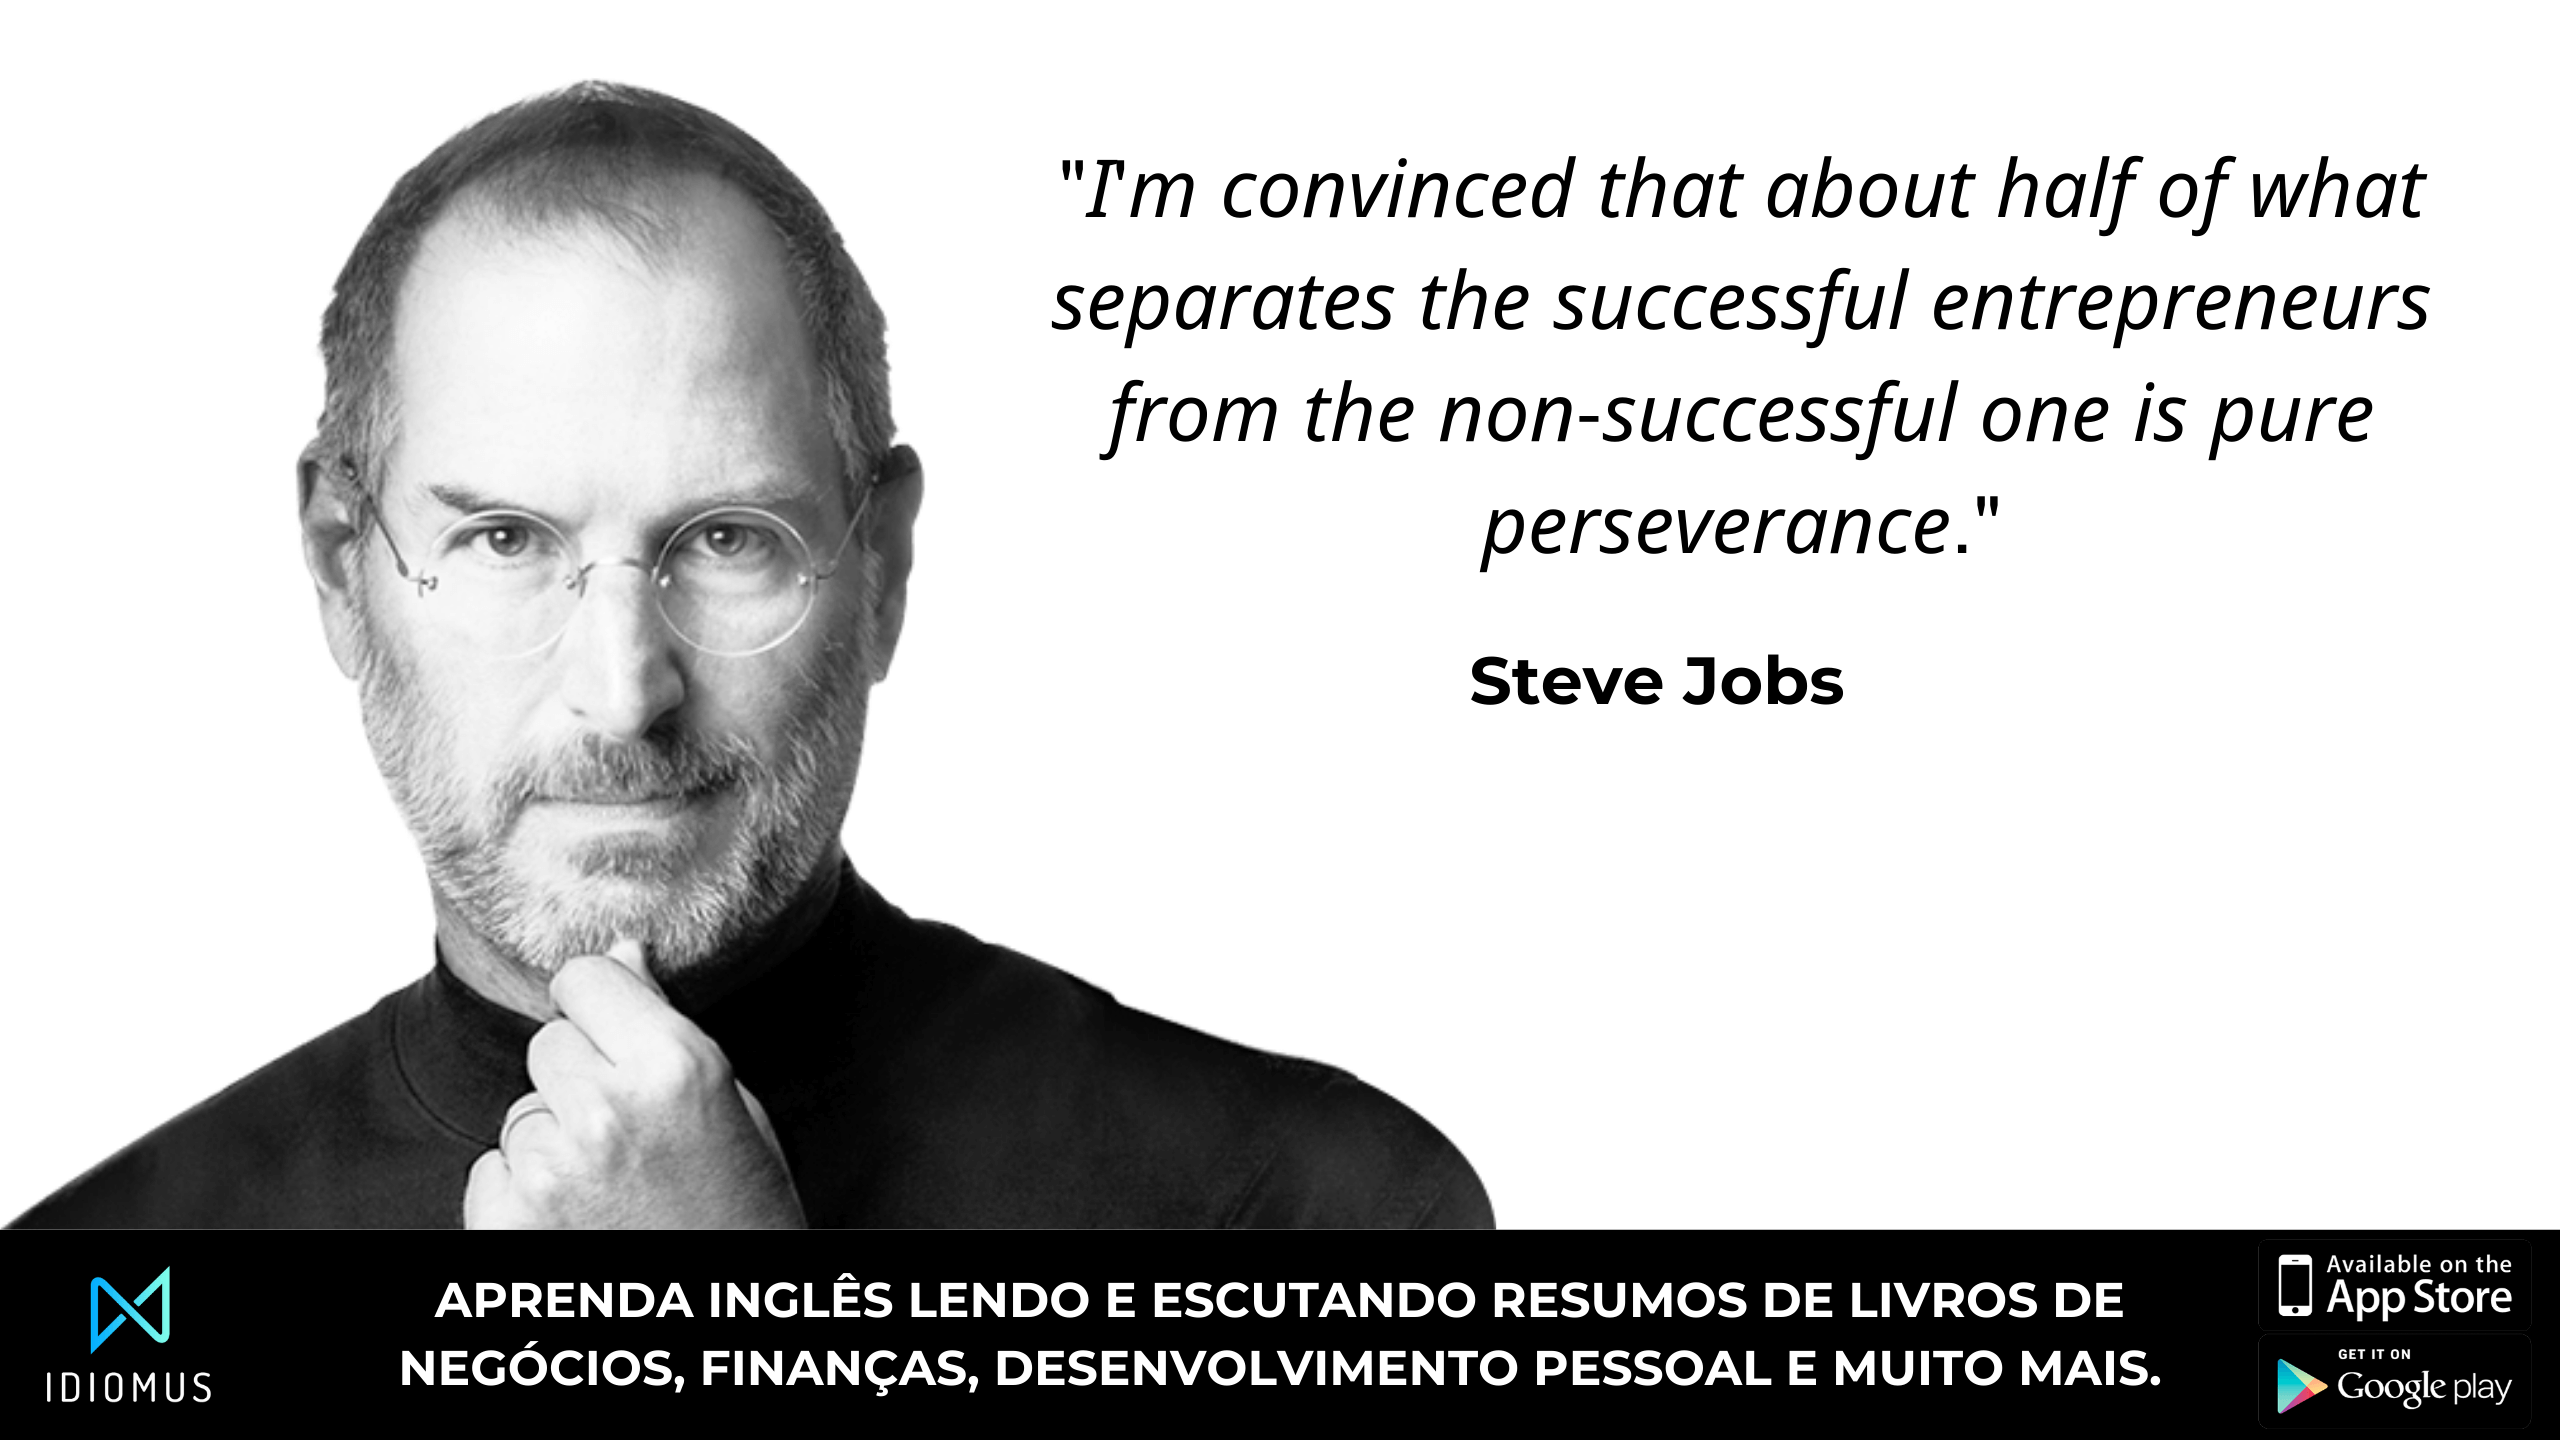 "I'm convinced that about half of what separates the successful entrepreneurs from the non-successful one is pure perseverance. Steve JOBS